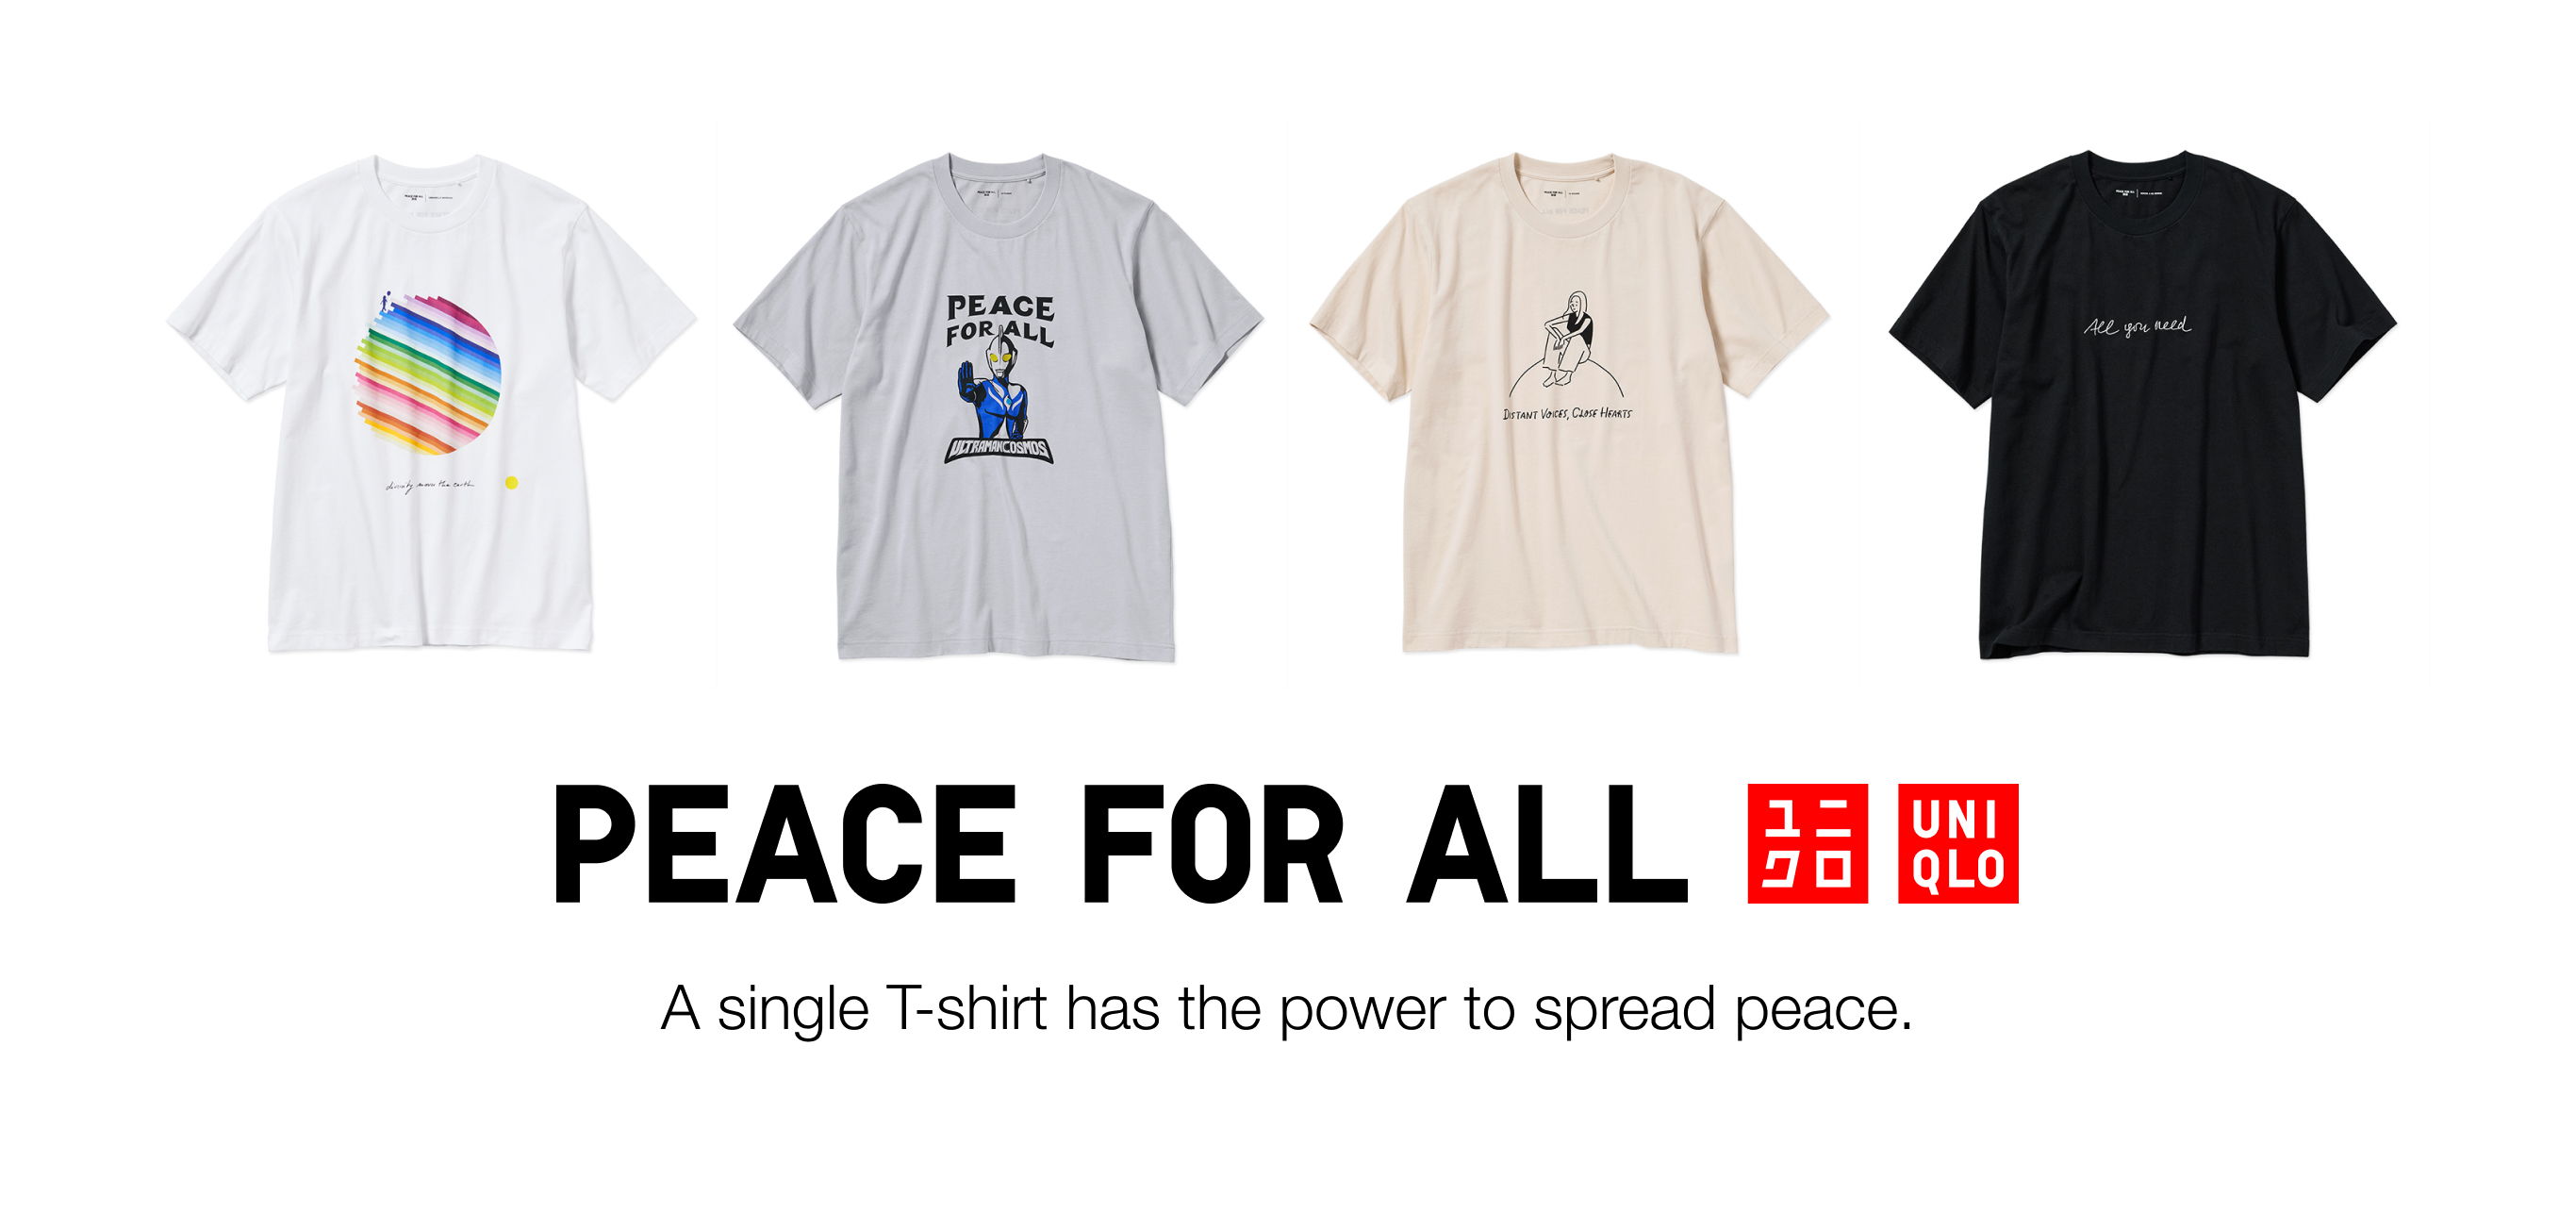 UNIQLO lanceert Holiday collectie met charity t-shirt project: PEACE FOR ALL